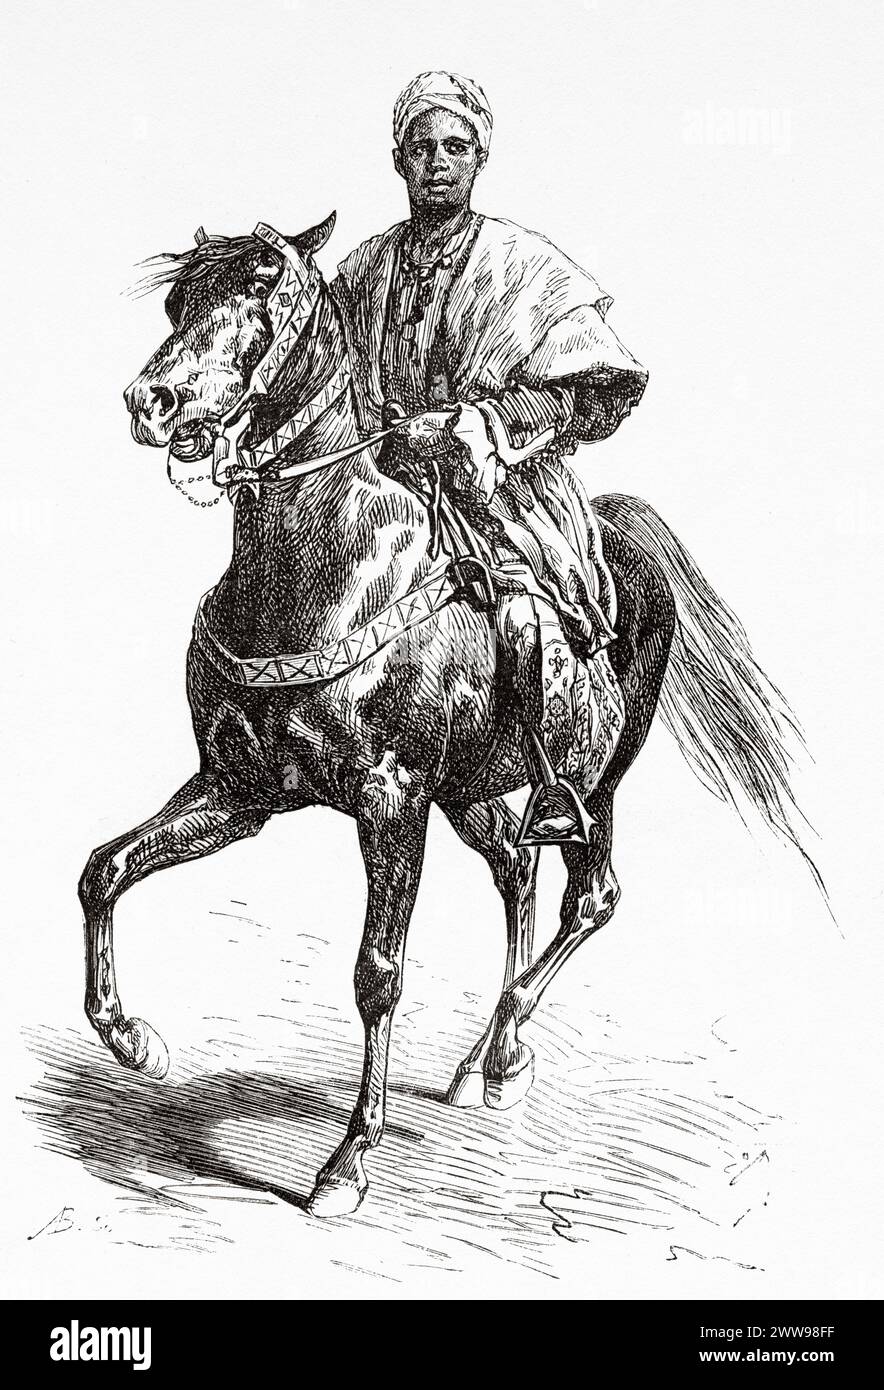 Man on horseback dressed in traditional clothing, Kanem-Bornu Empire, Chad, Central Africa. Drawing by Ivan Pranishnikoff (1841 - 1909) Journey from Borno to Baguirmi 1872 by Dr. Gustav Hermann Nachtigal (1834 - 1885) Le Tour du Monde 1880 Stock Photo